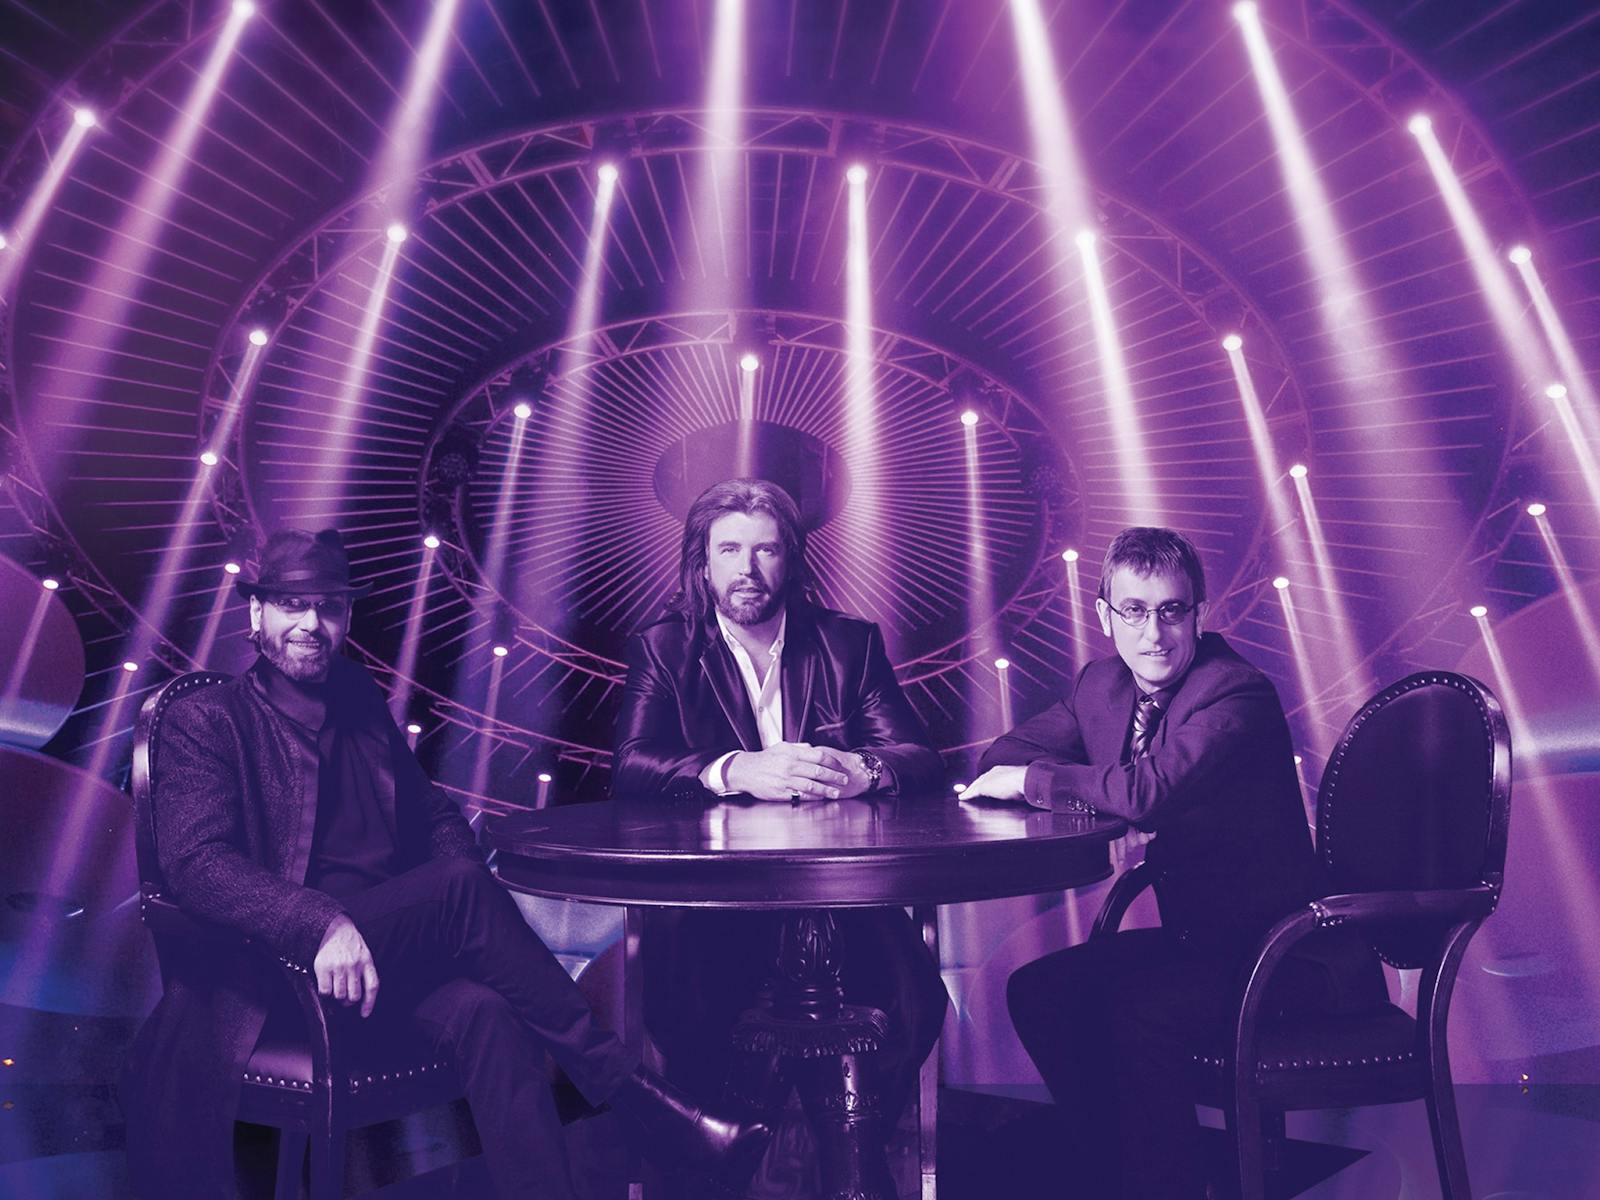 Image for The Australian Bee Gees Show - 25th Anniversary Tour - Queanbeyan